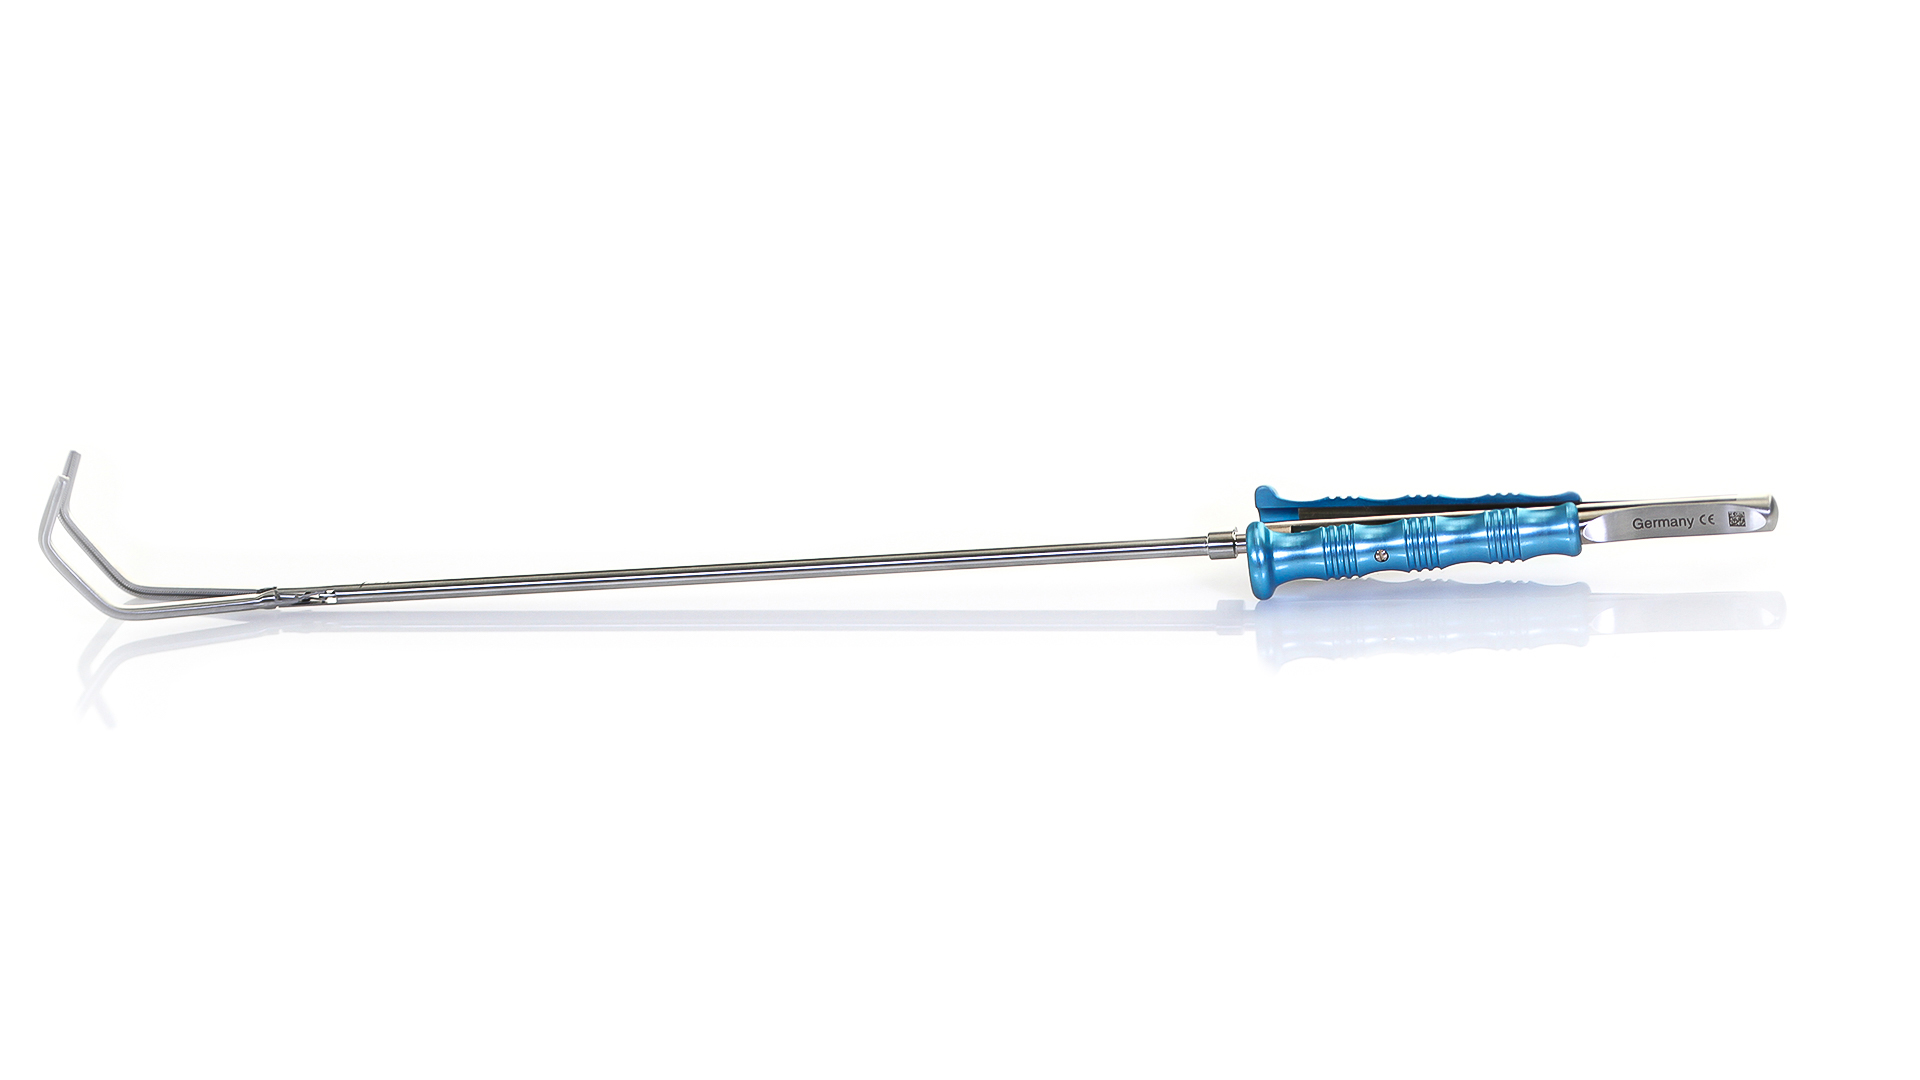 MIS Double Angled Dissector – Double Angled DeBakey Atraumatic 34mm jaws